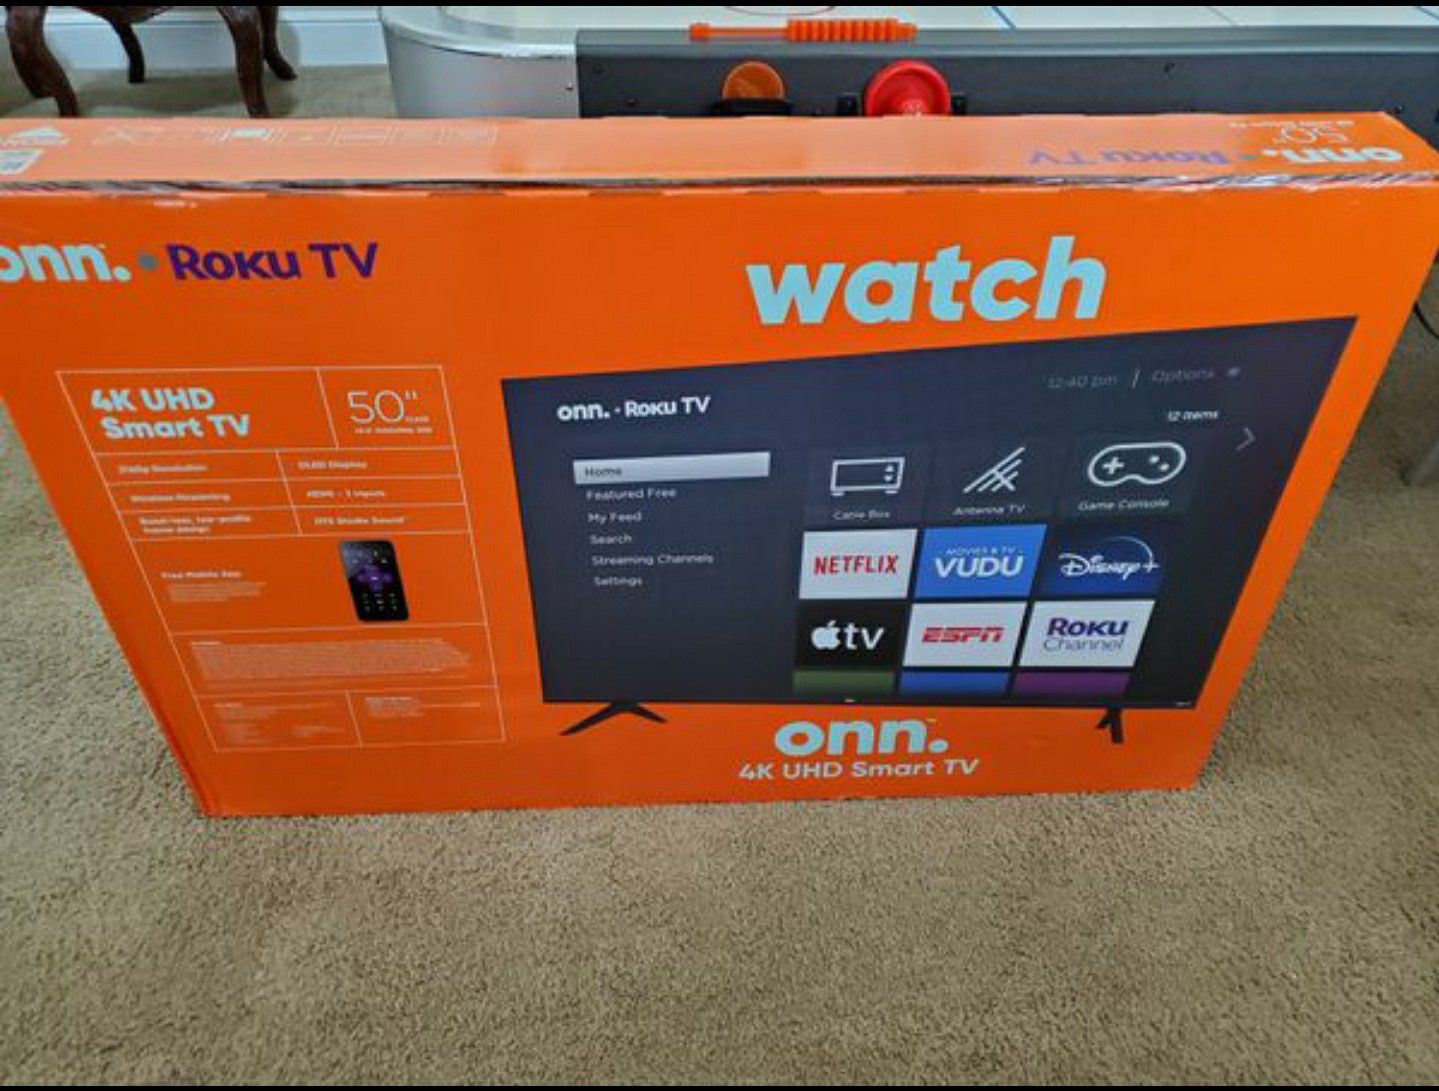 50 inch 4k ultra smart led hdtv built in Roku.... NEW in box and sealed .... NO TRADES